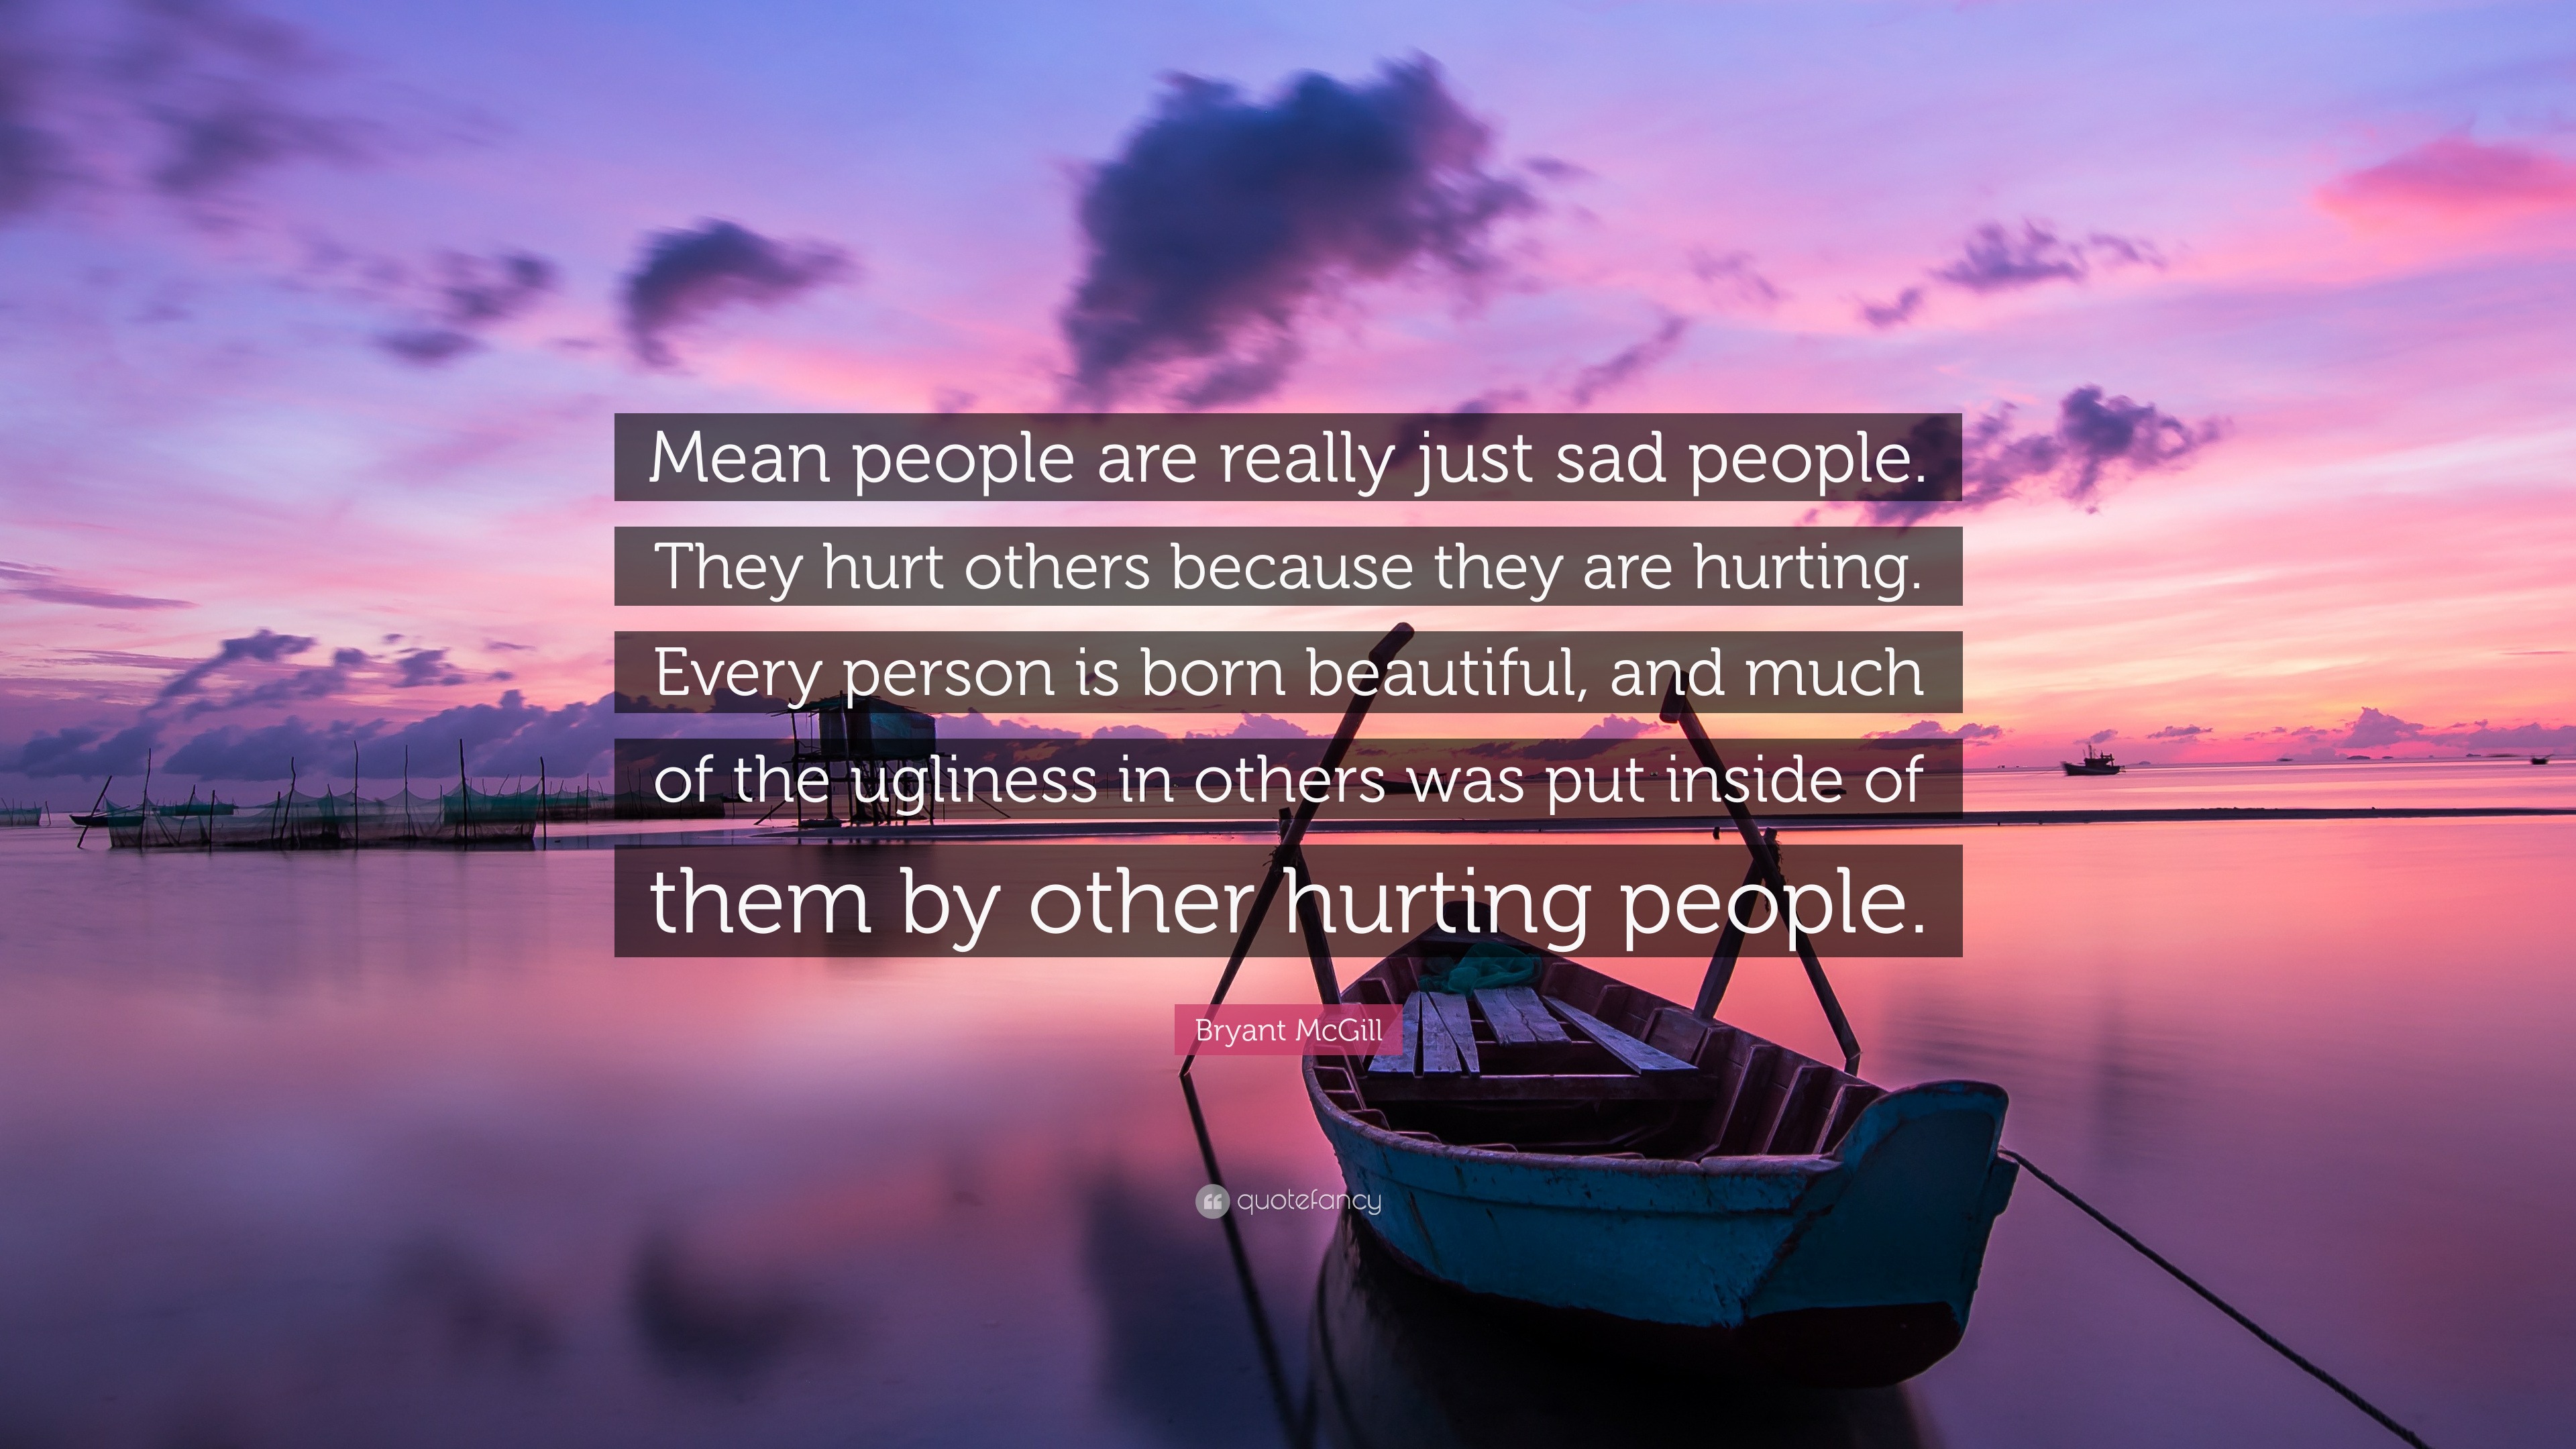 Bryant McGill Quote: “Mean people are really just sad people. They hurt